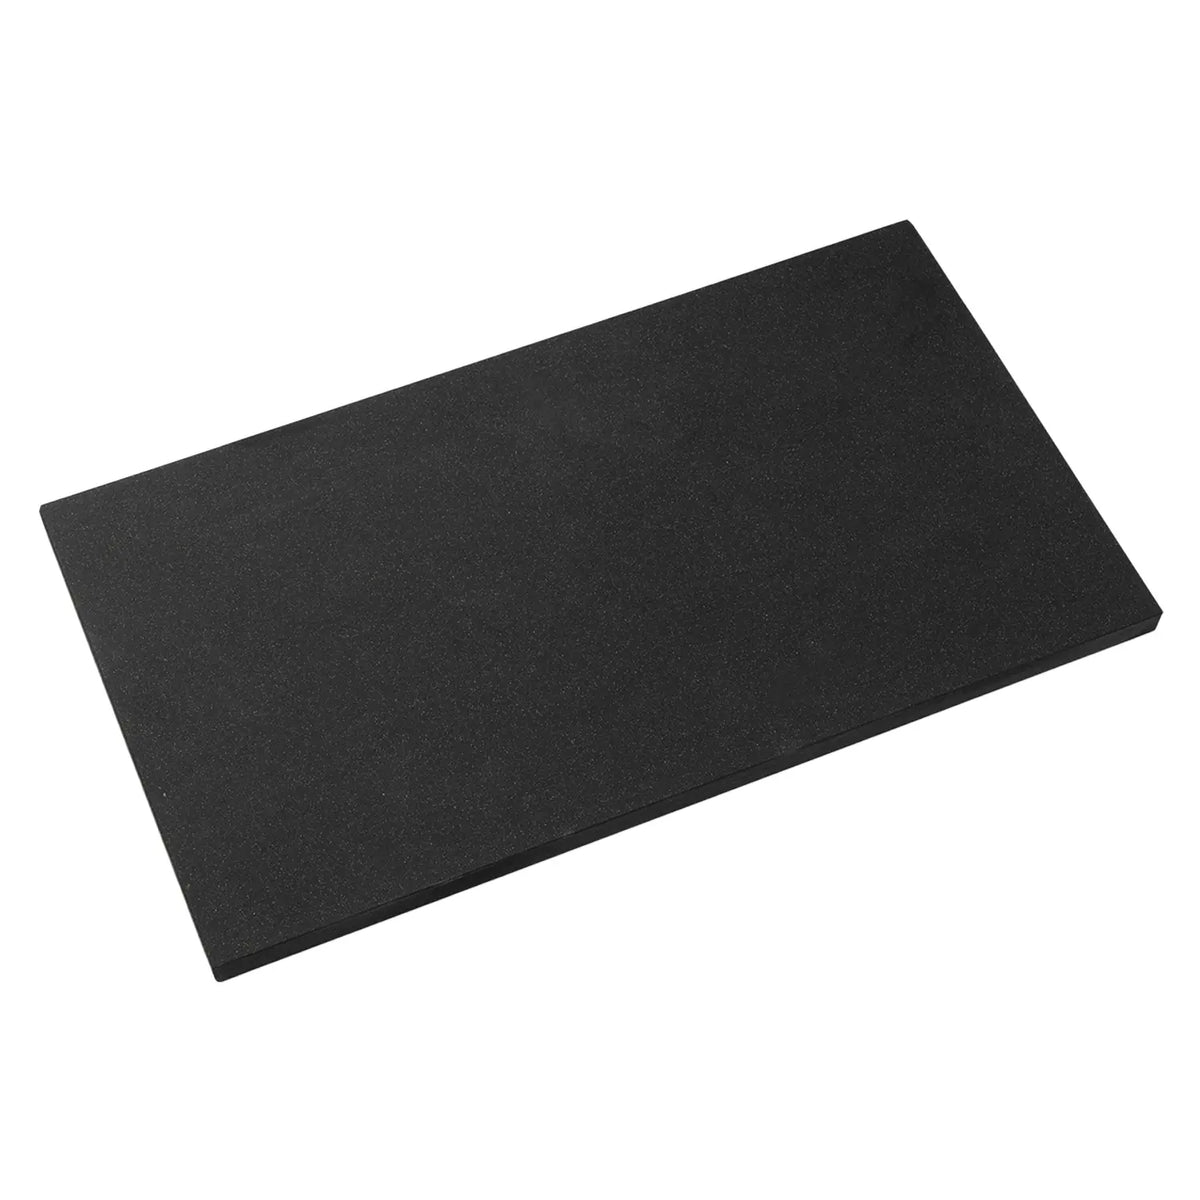 Cookin Cut Synthetic Rubber Cutting Board, Antibacterial Model, Professional Grade for Home, Made in Japan LL